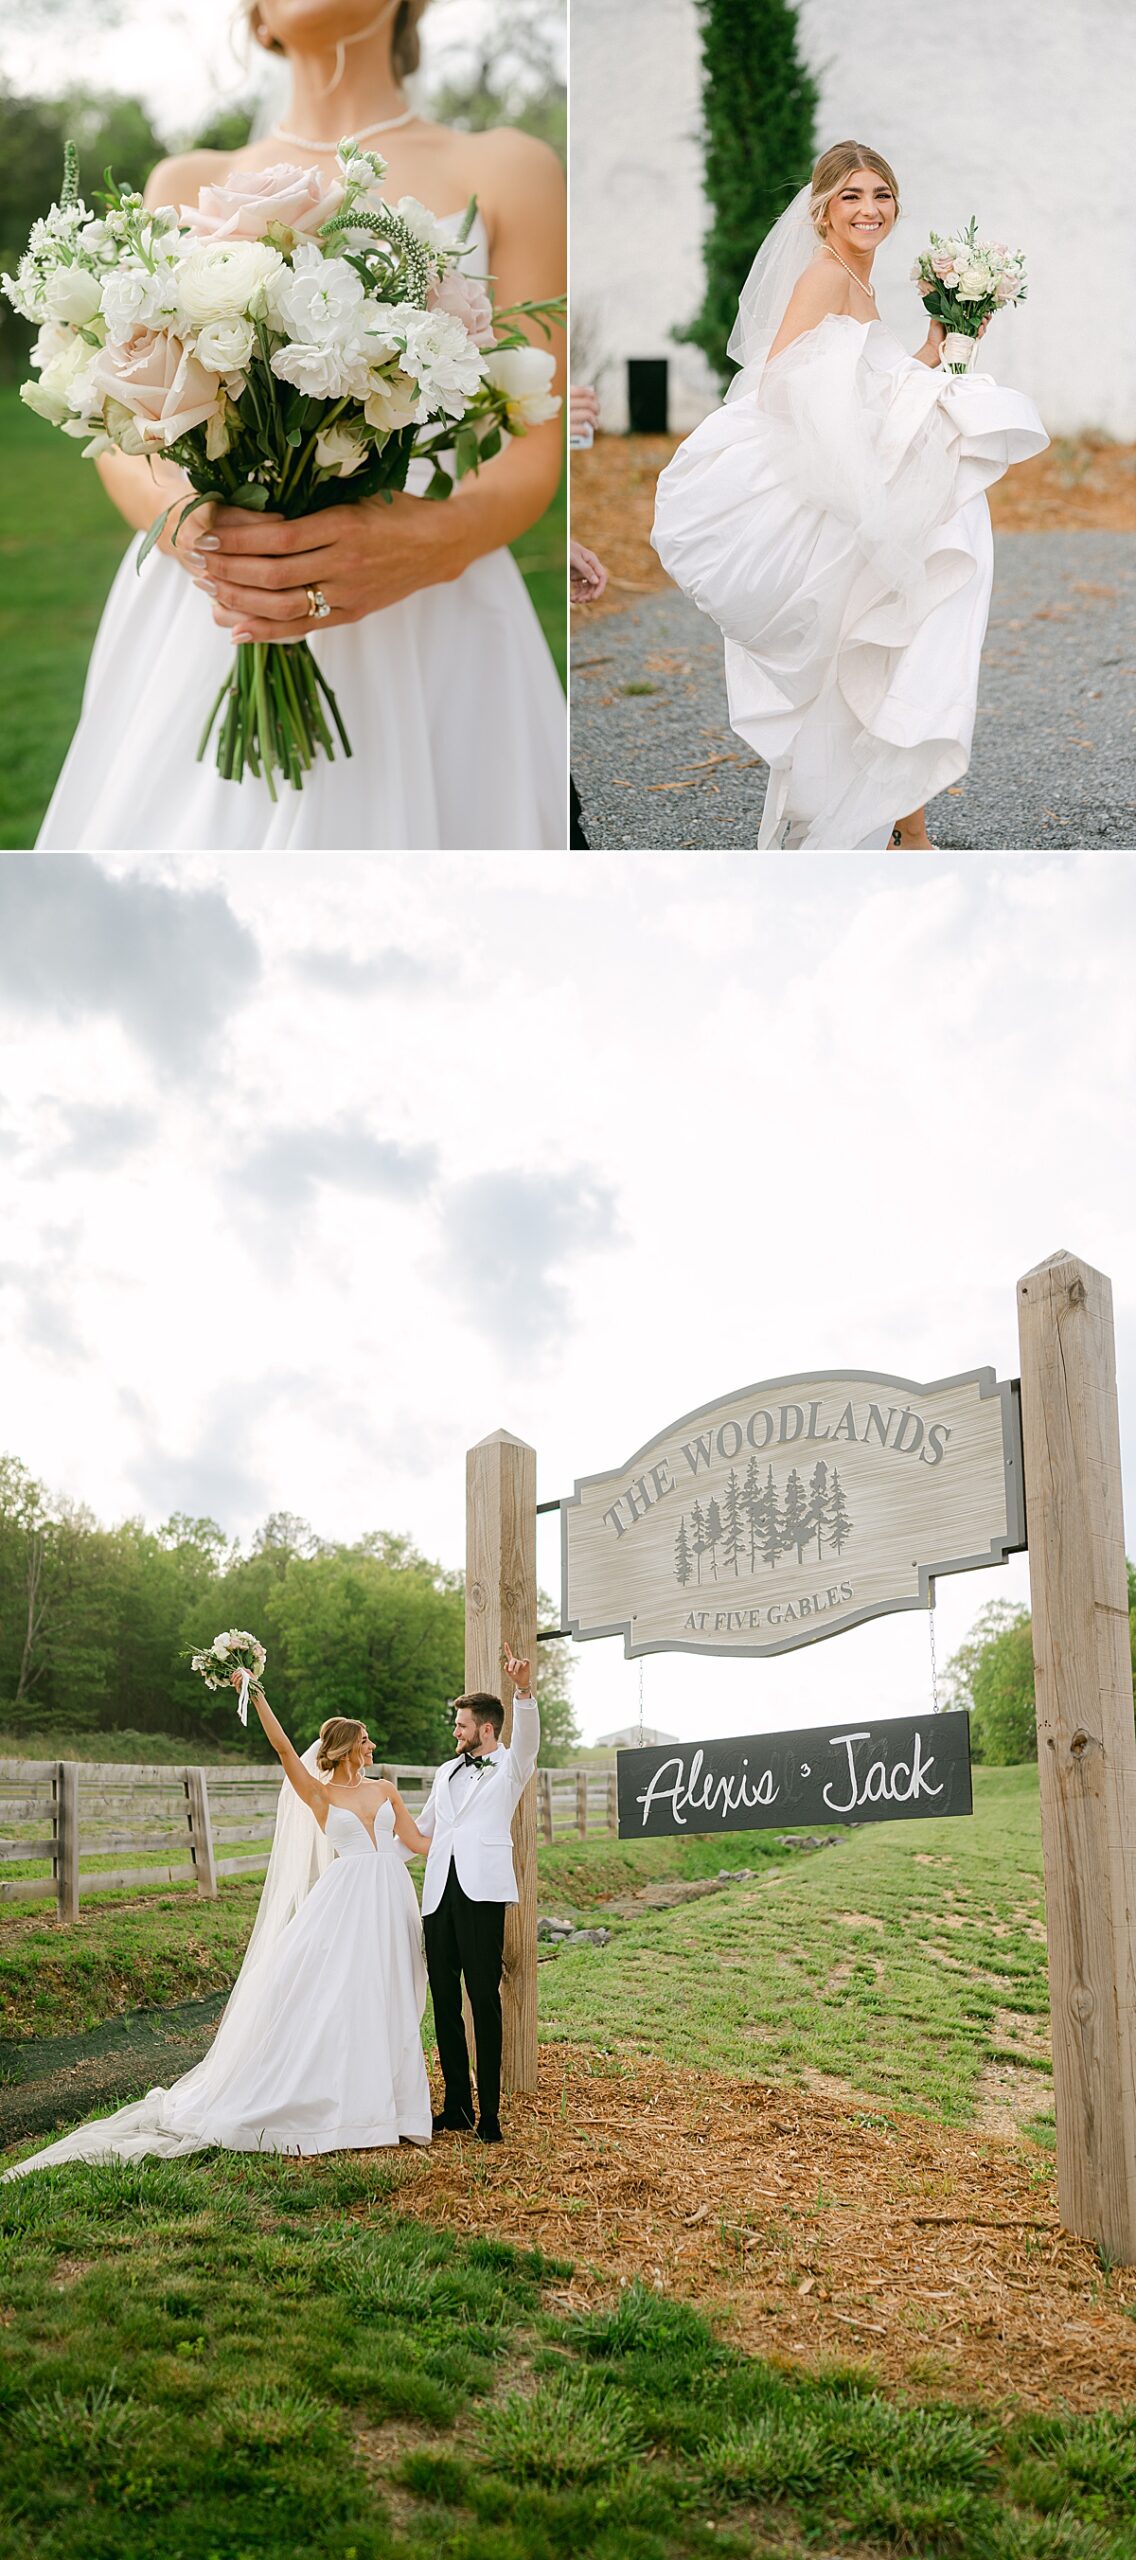 Bride and groom portrait posing by their venue The Woodlands at Five Gables sign. 